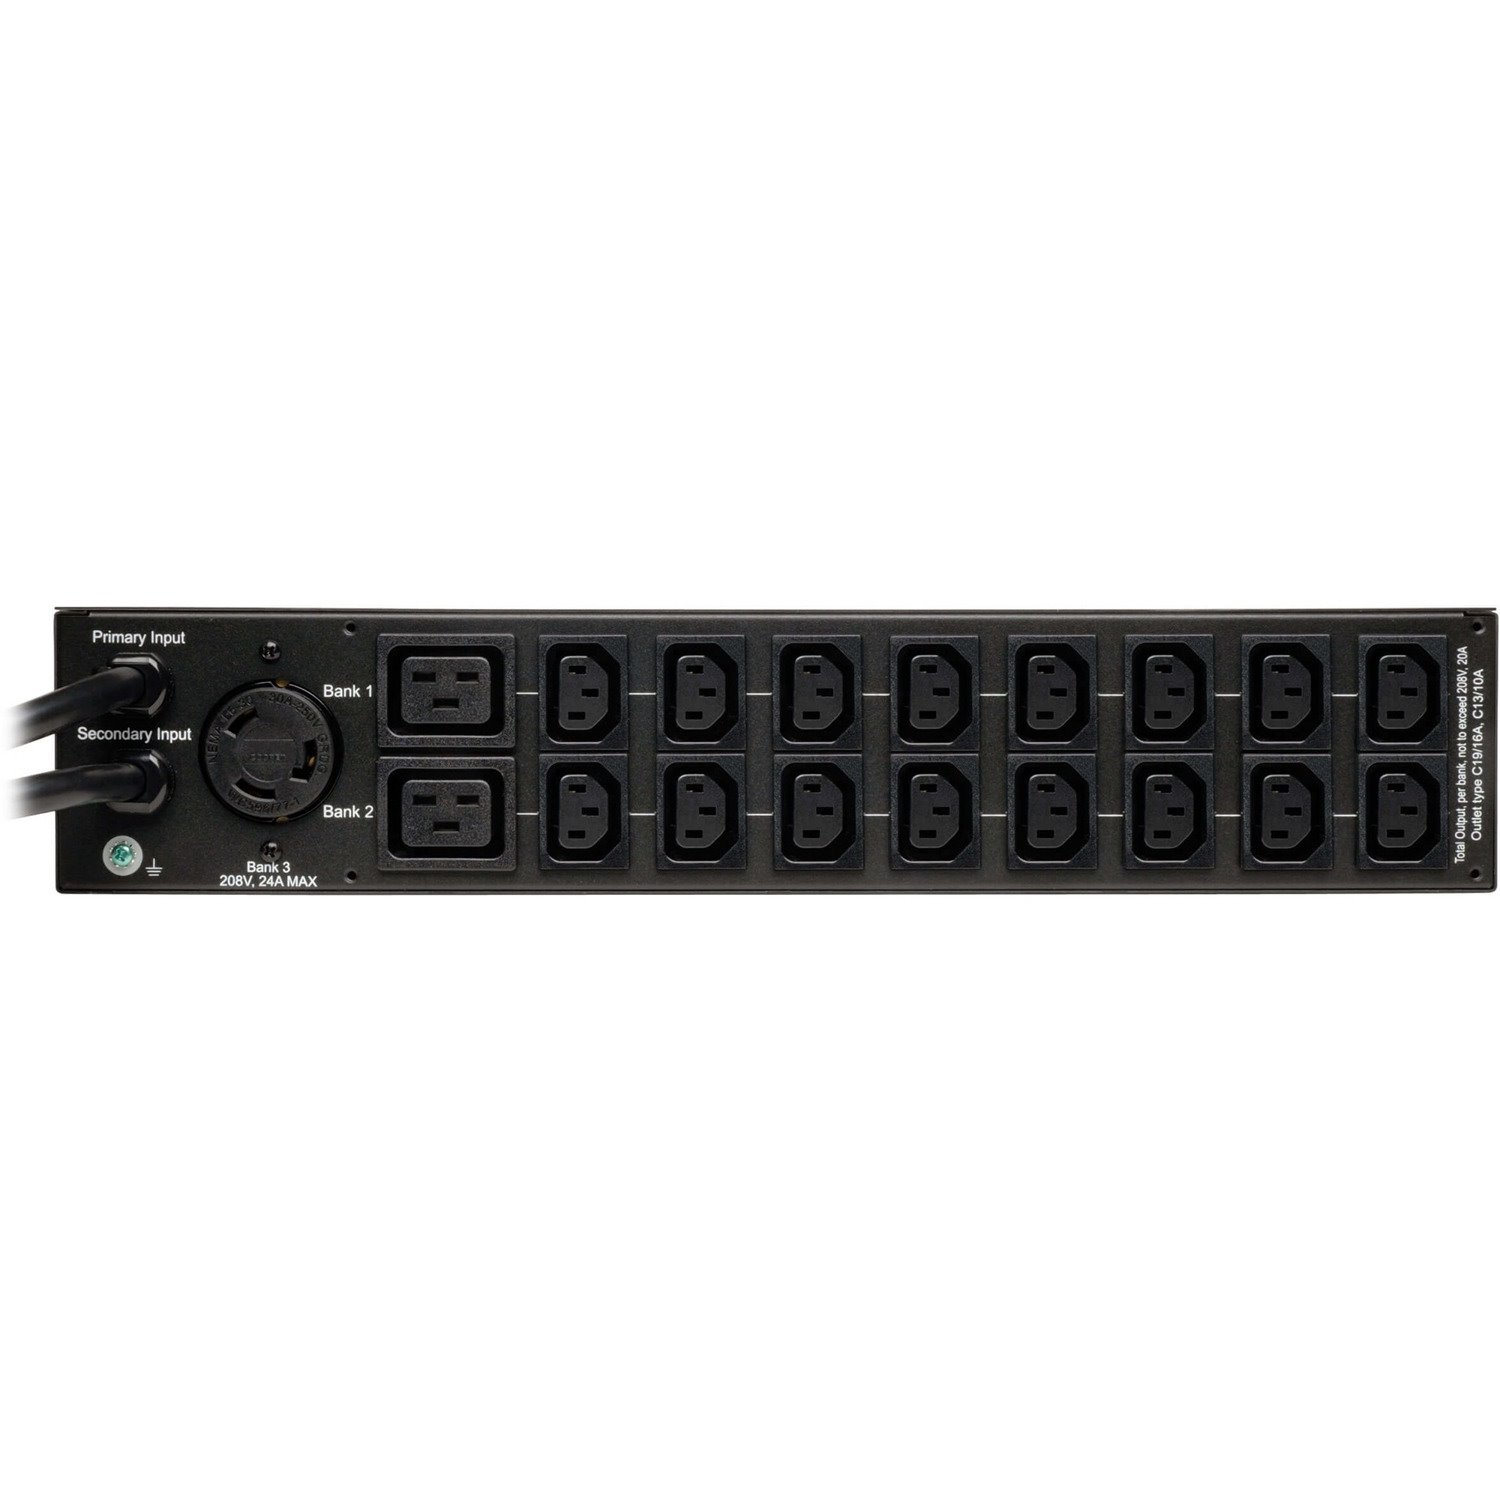 Tripp Lite by Eaton 5.8kW Single-Phase Local Metered Automatic Transfer Switch PDU, Two 200-240V L6-30P Inputs, 16-C13 2-C19 & 1 L6-30R Outlet, 2U, TAA